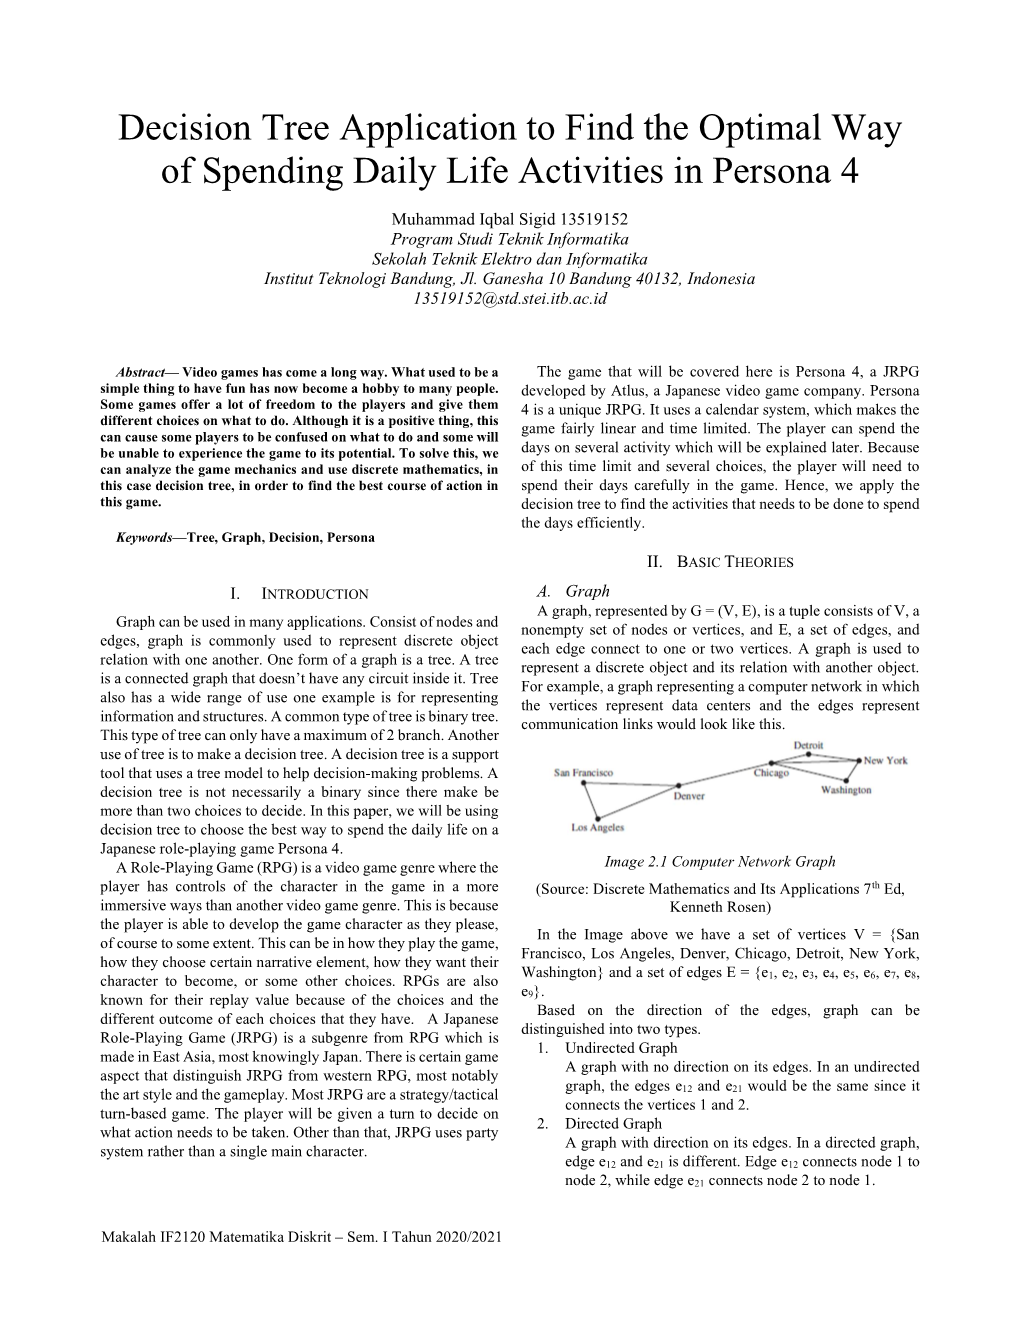 Decision Tree Application to Find the Optimal Way of Spending Daily Life Activities in Persona 4